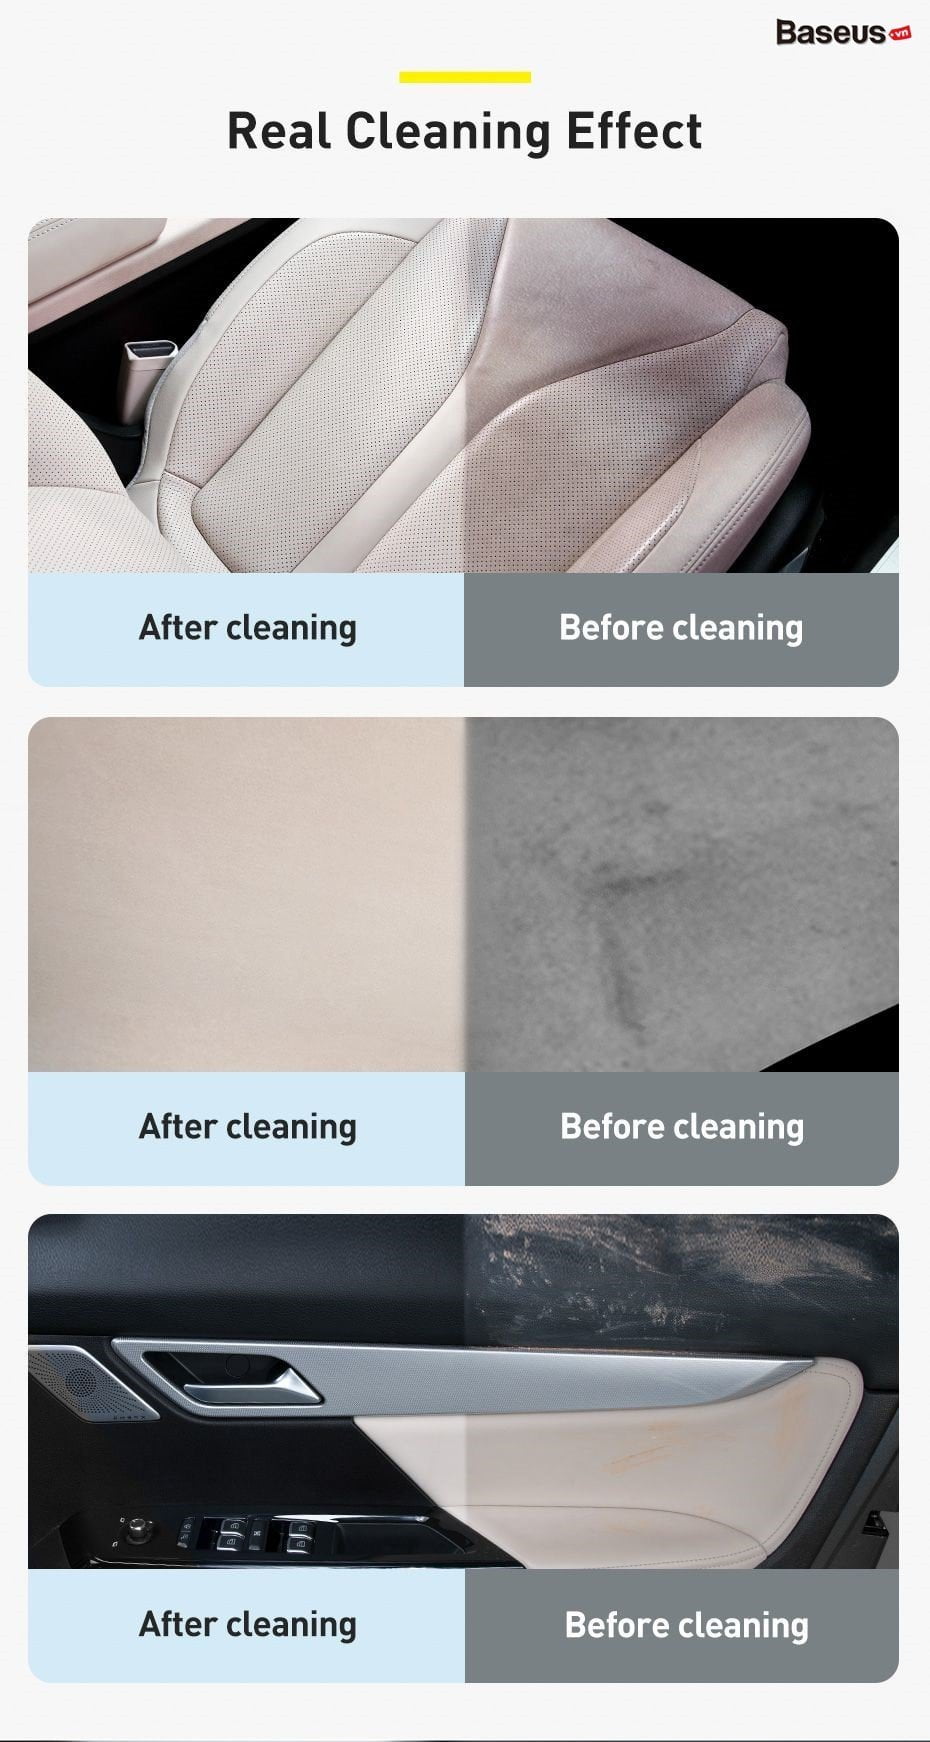 easy clean rinse free car interior cleaner images 03 ce629d551a164bf48b7ff335fd4c6b8c